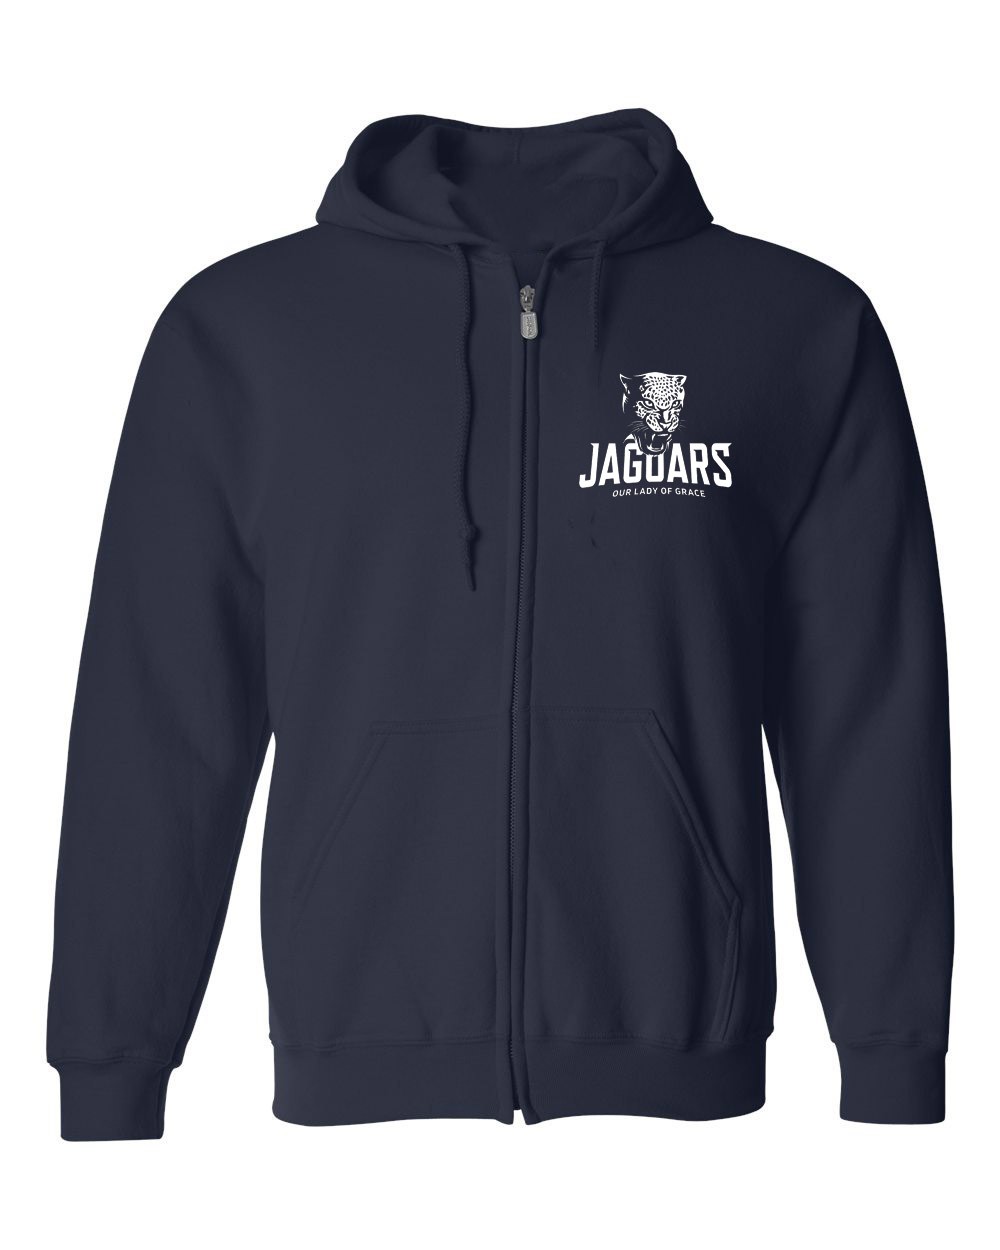 OLG Spirit Zipper Hoodie w/ White Logo - Please allow 2-3 Weeks for Delivery